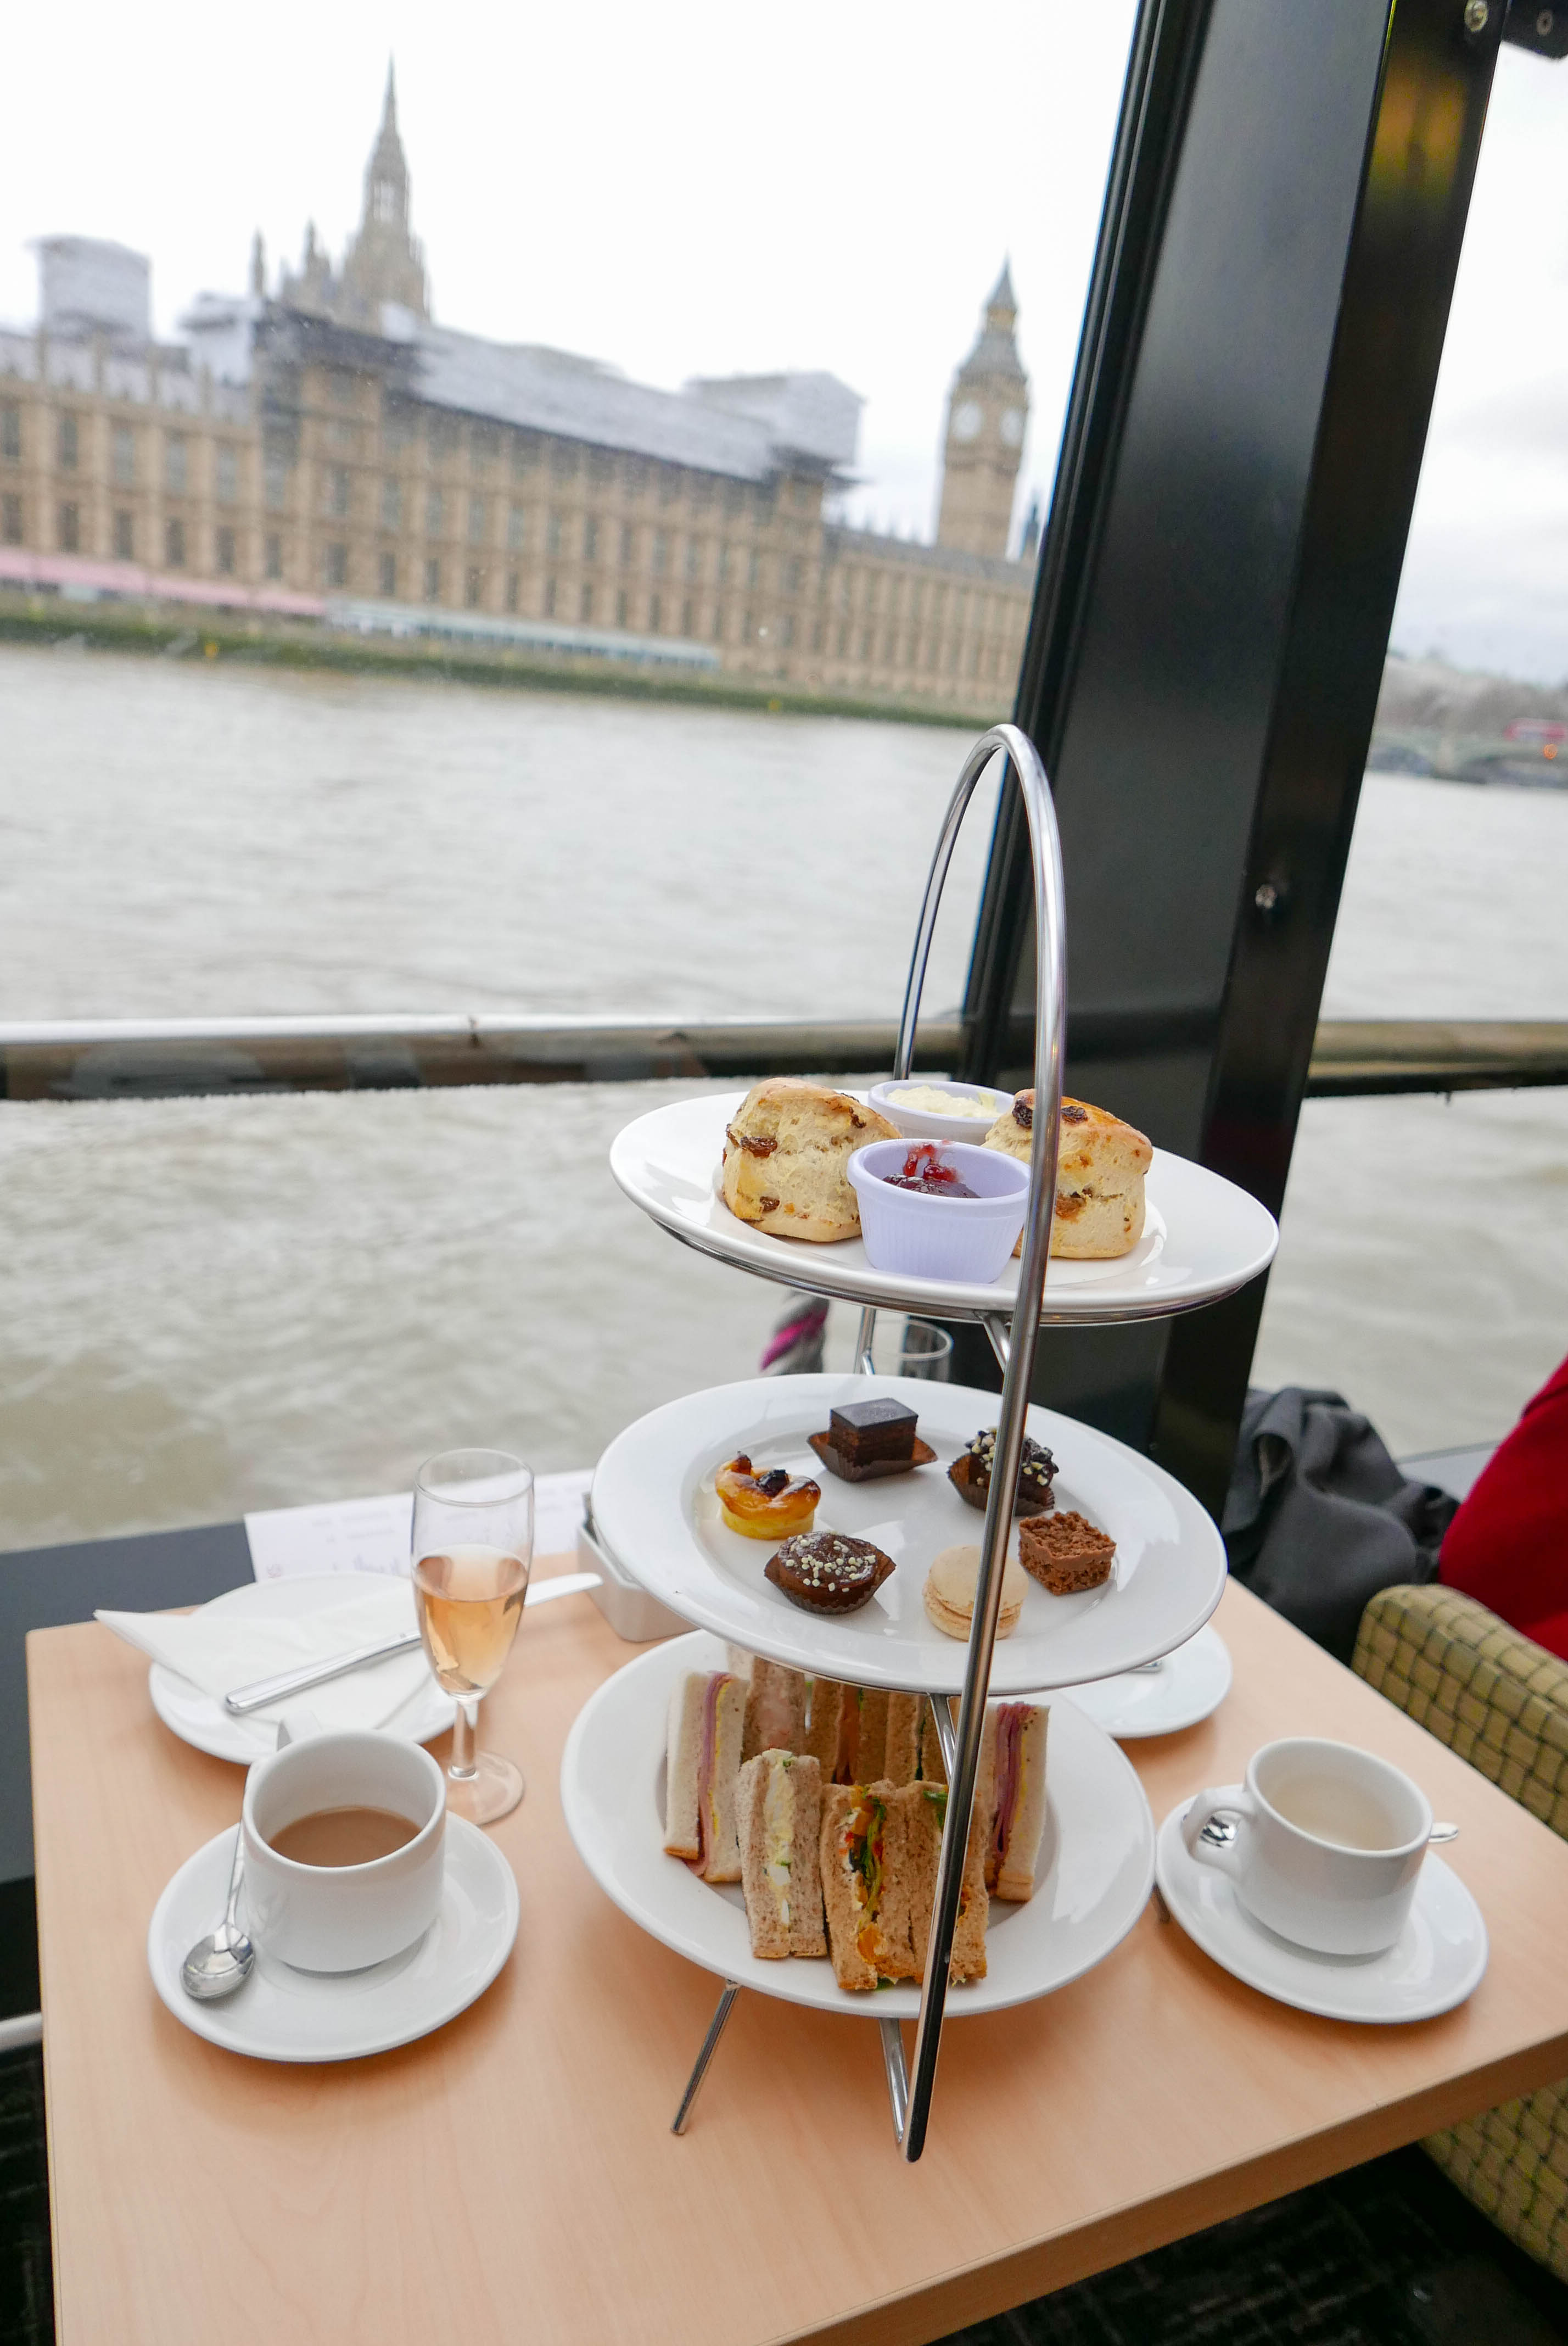 boat trips with afternoon tea near me